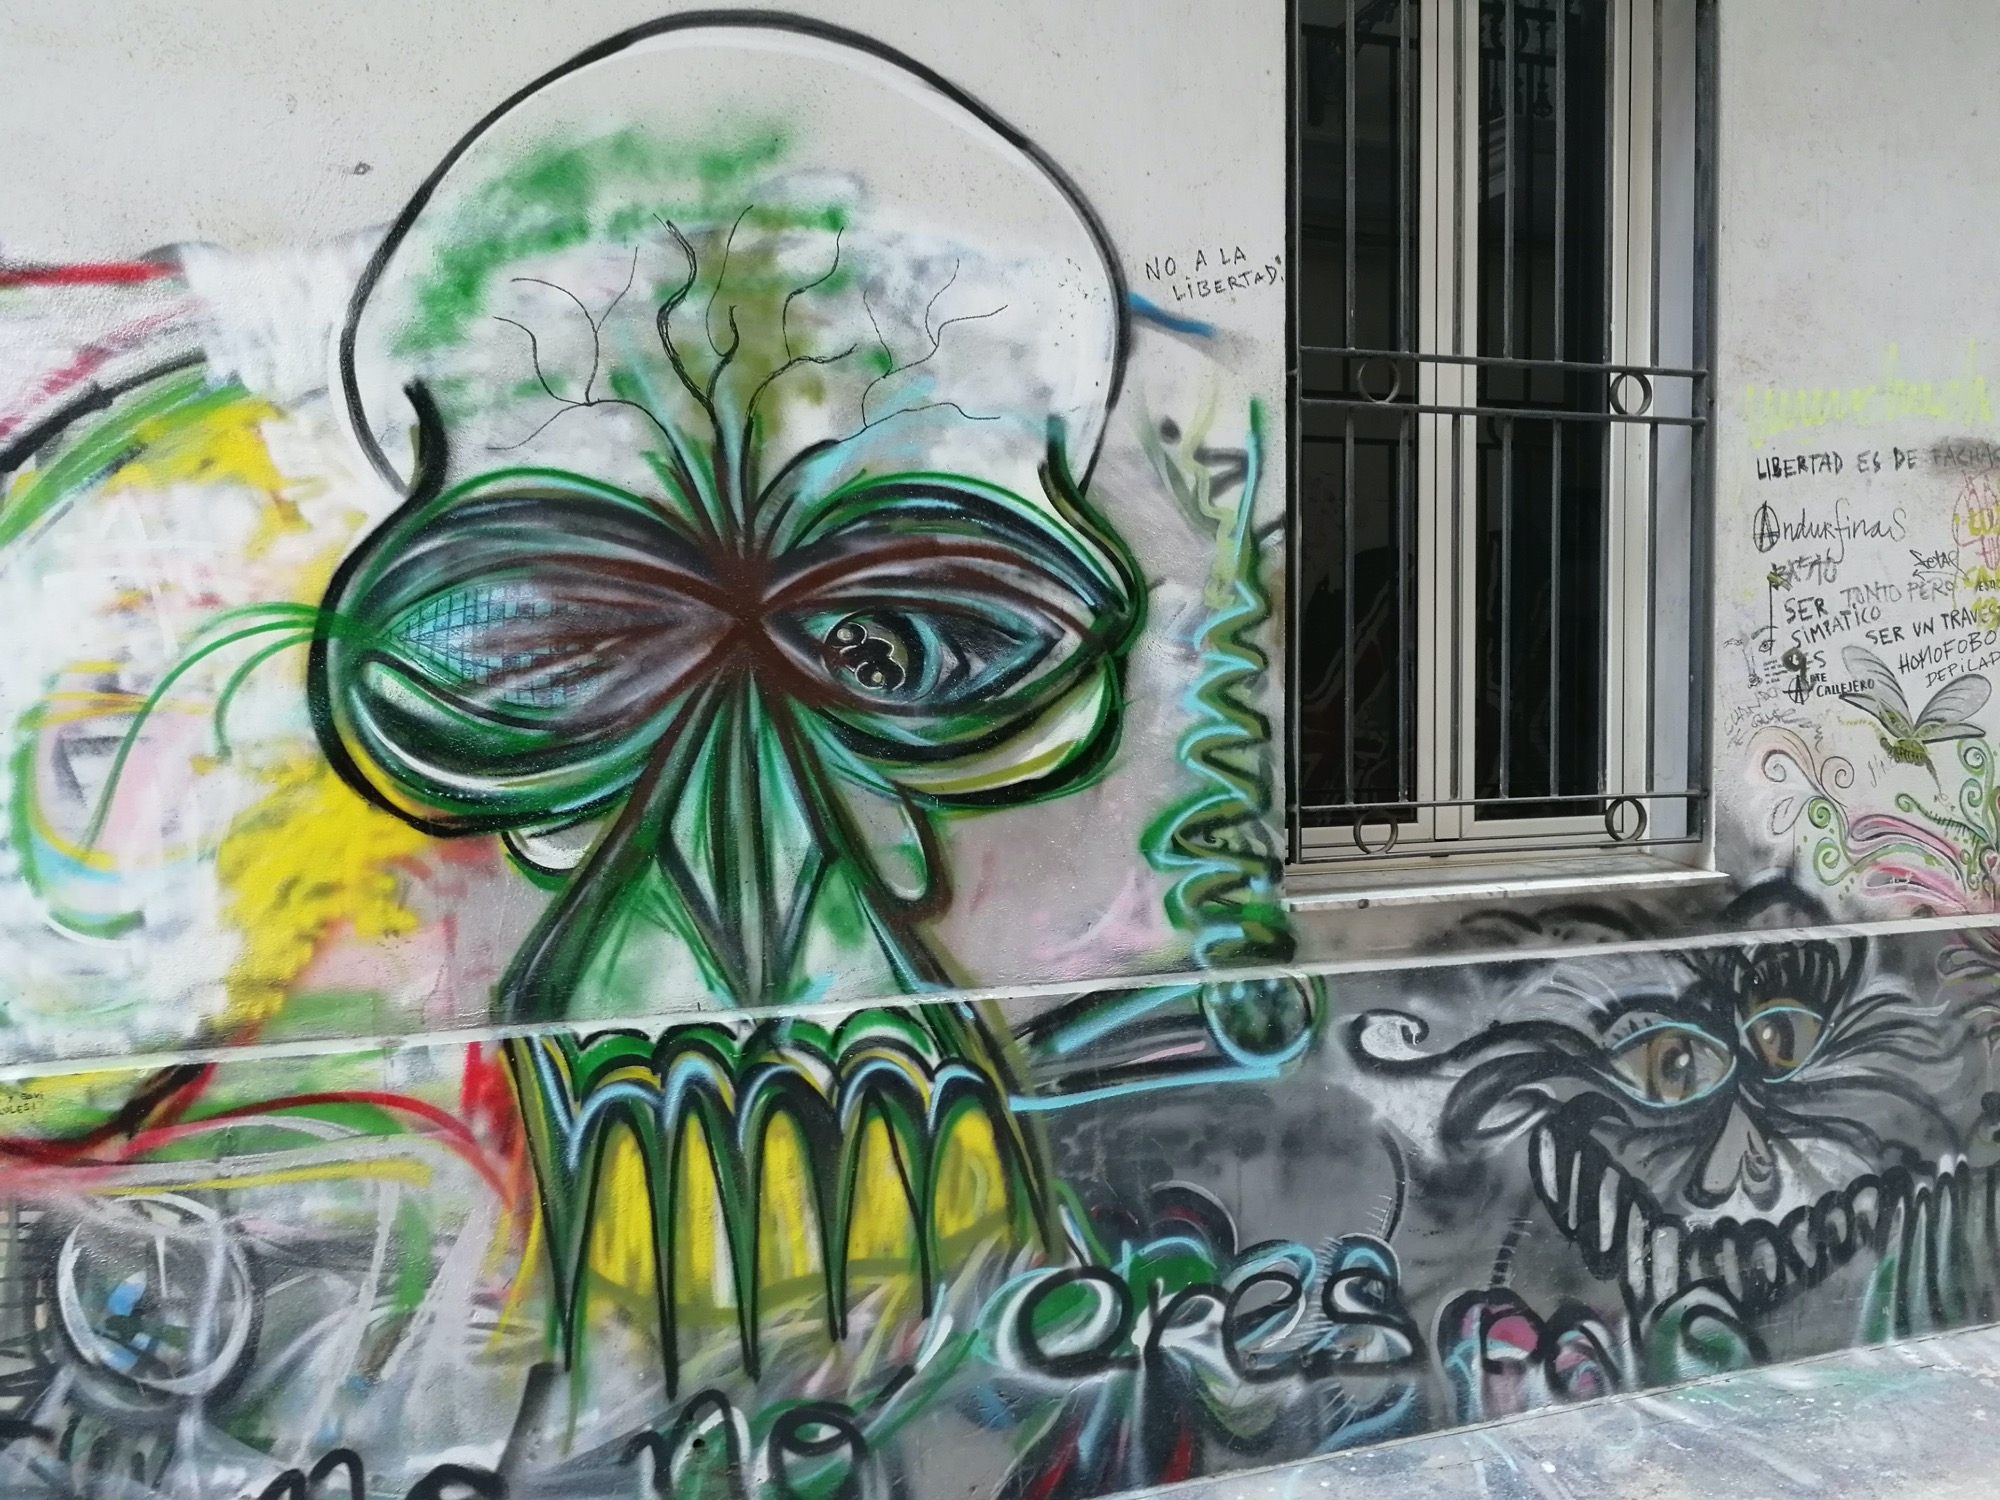 Graffiti 3577  captured by Rabot in València Spain